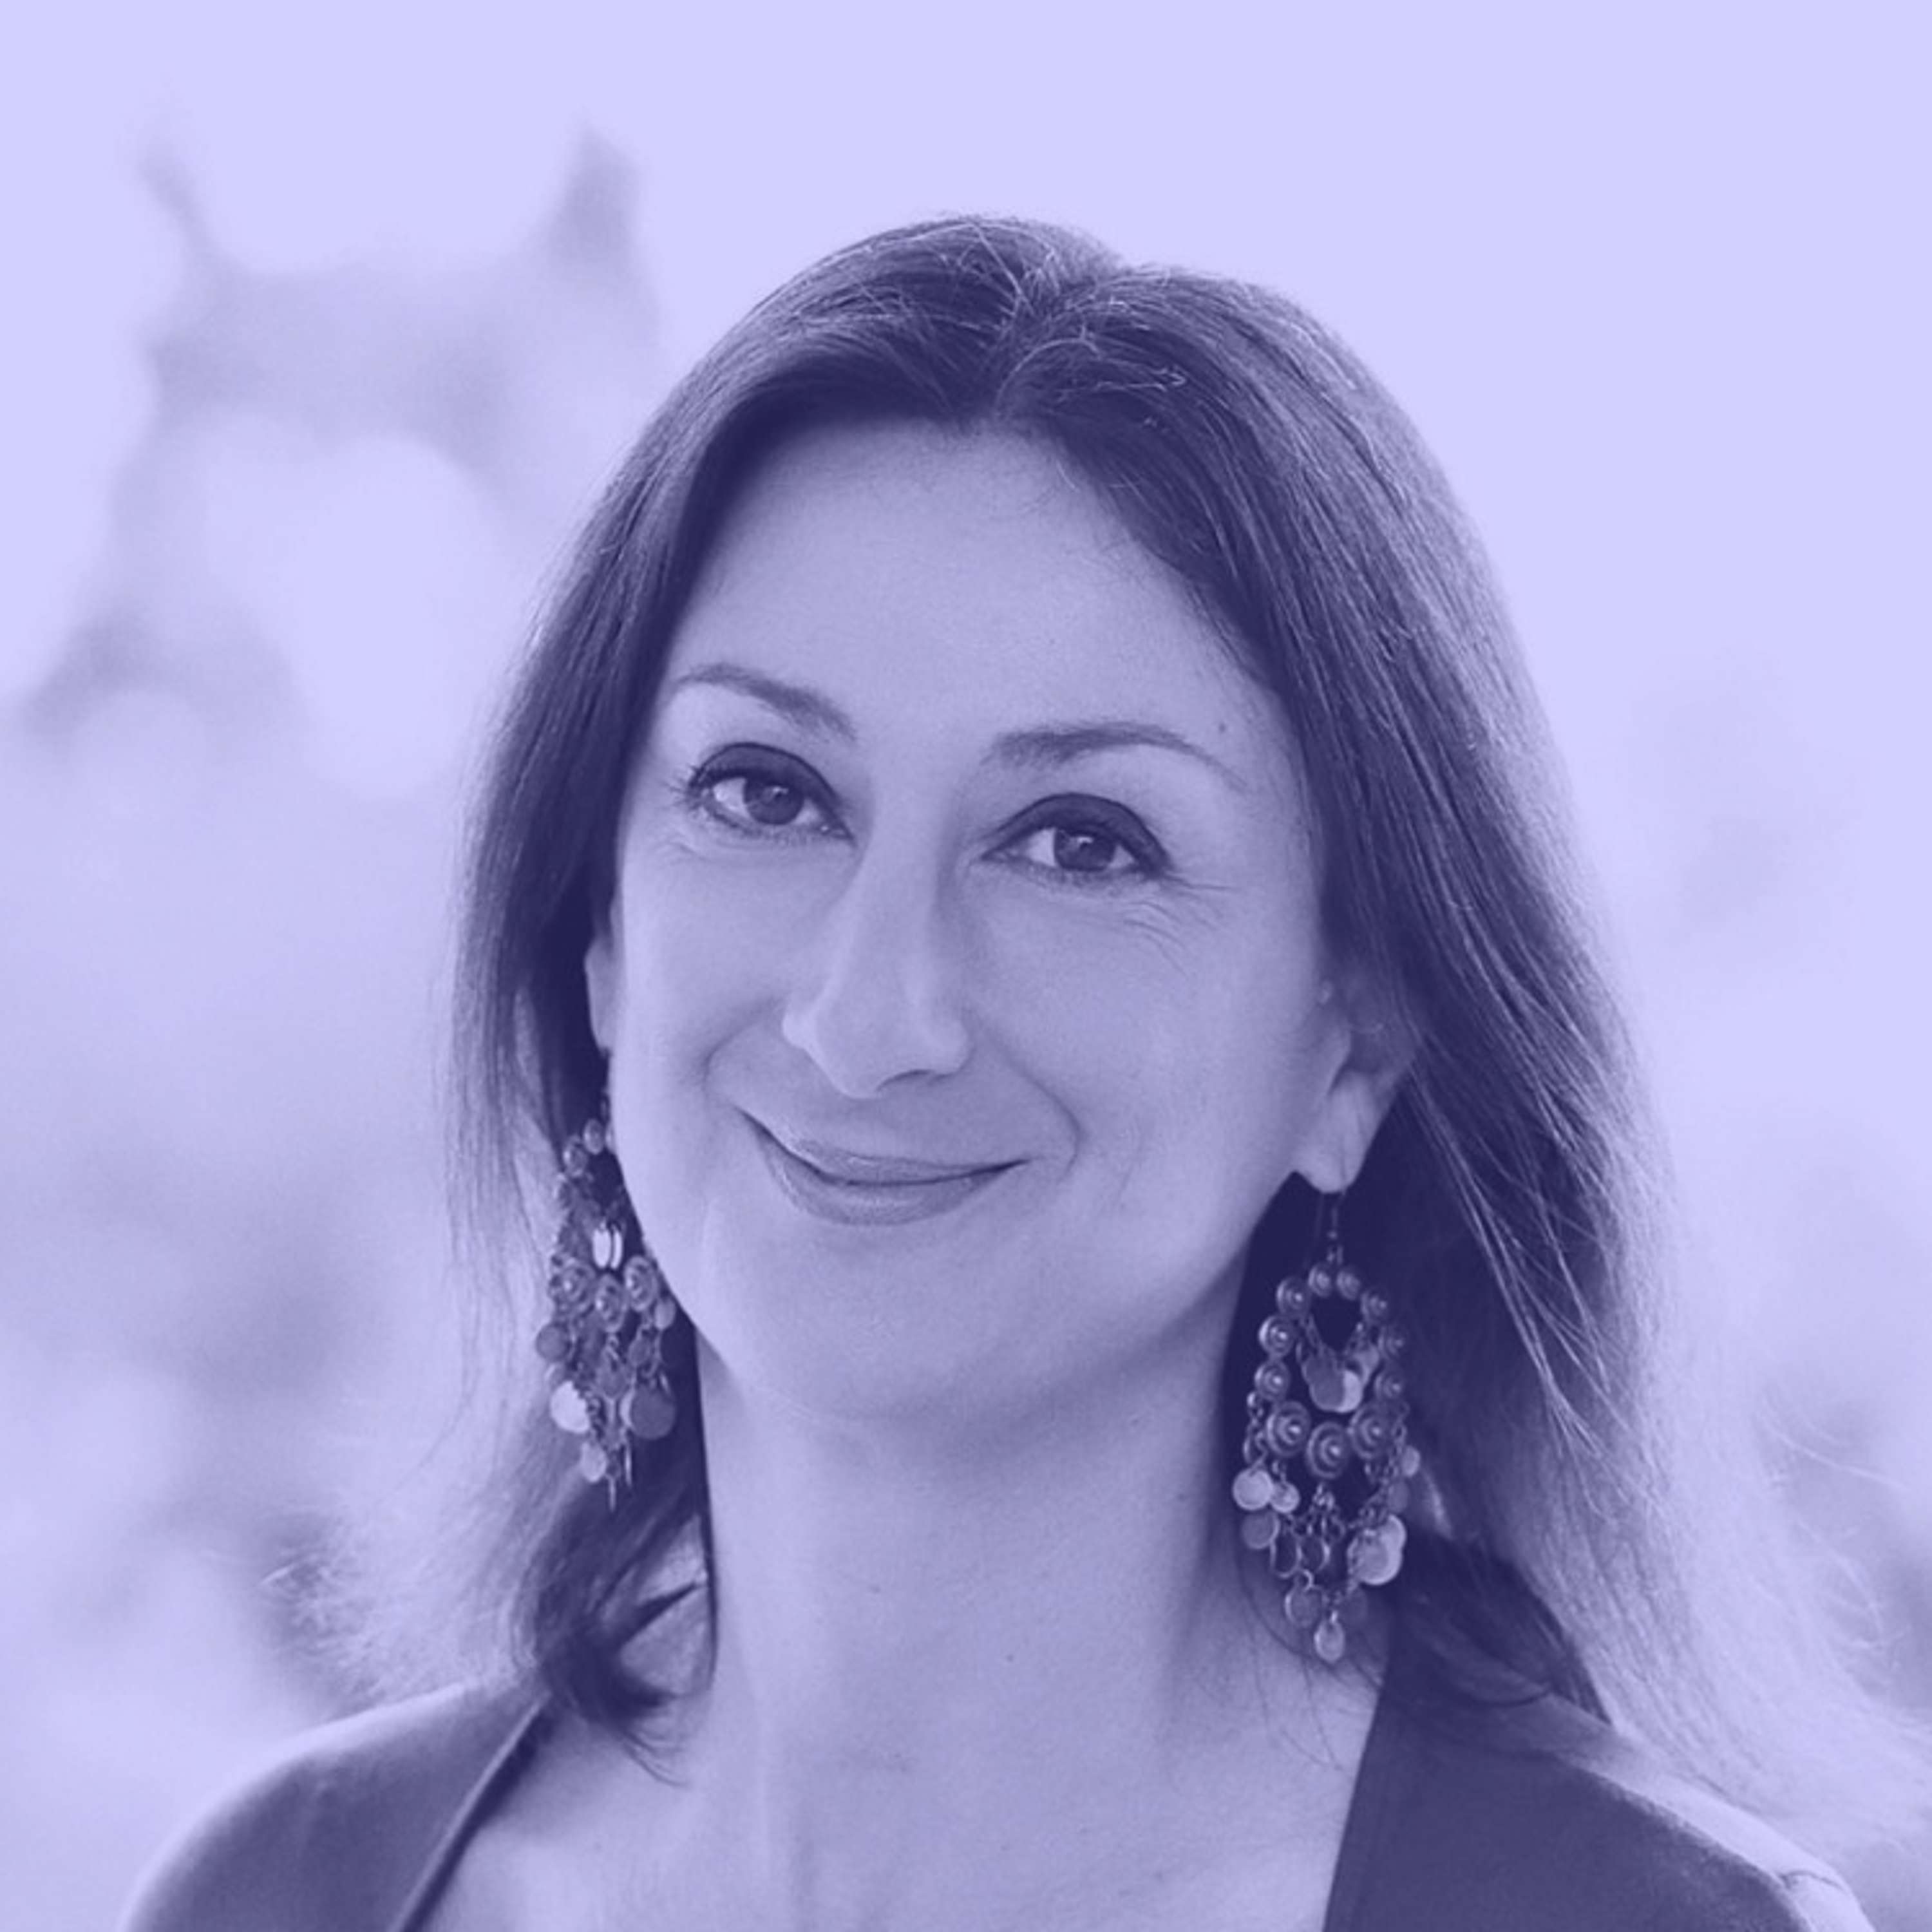 #306 | The Murder of Daphne Caruana Galizia Part 1 | Cocaine, Corruption, and Filthy Money